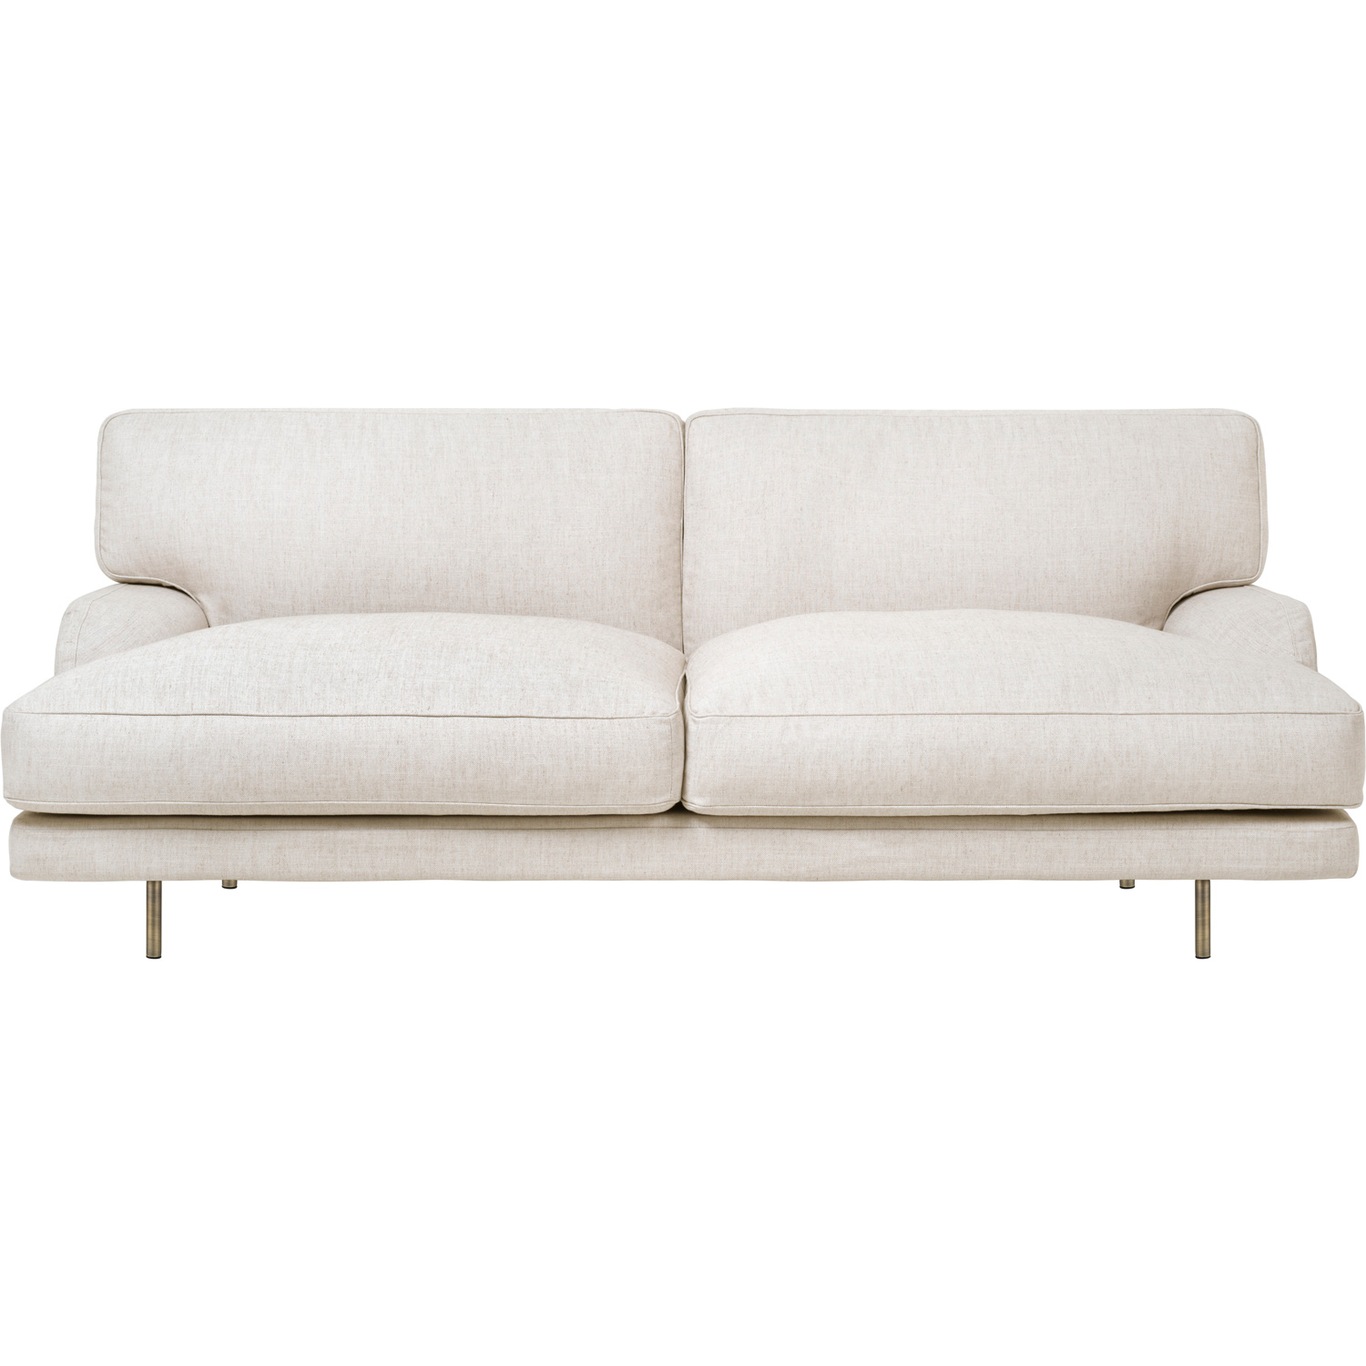 Flaneur Sofa LC 2-seters, Ben Messing / Hot Madison 419 Off White